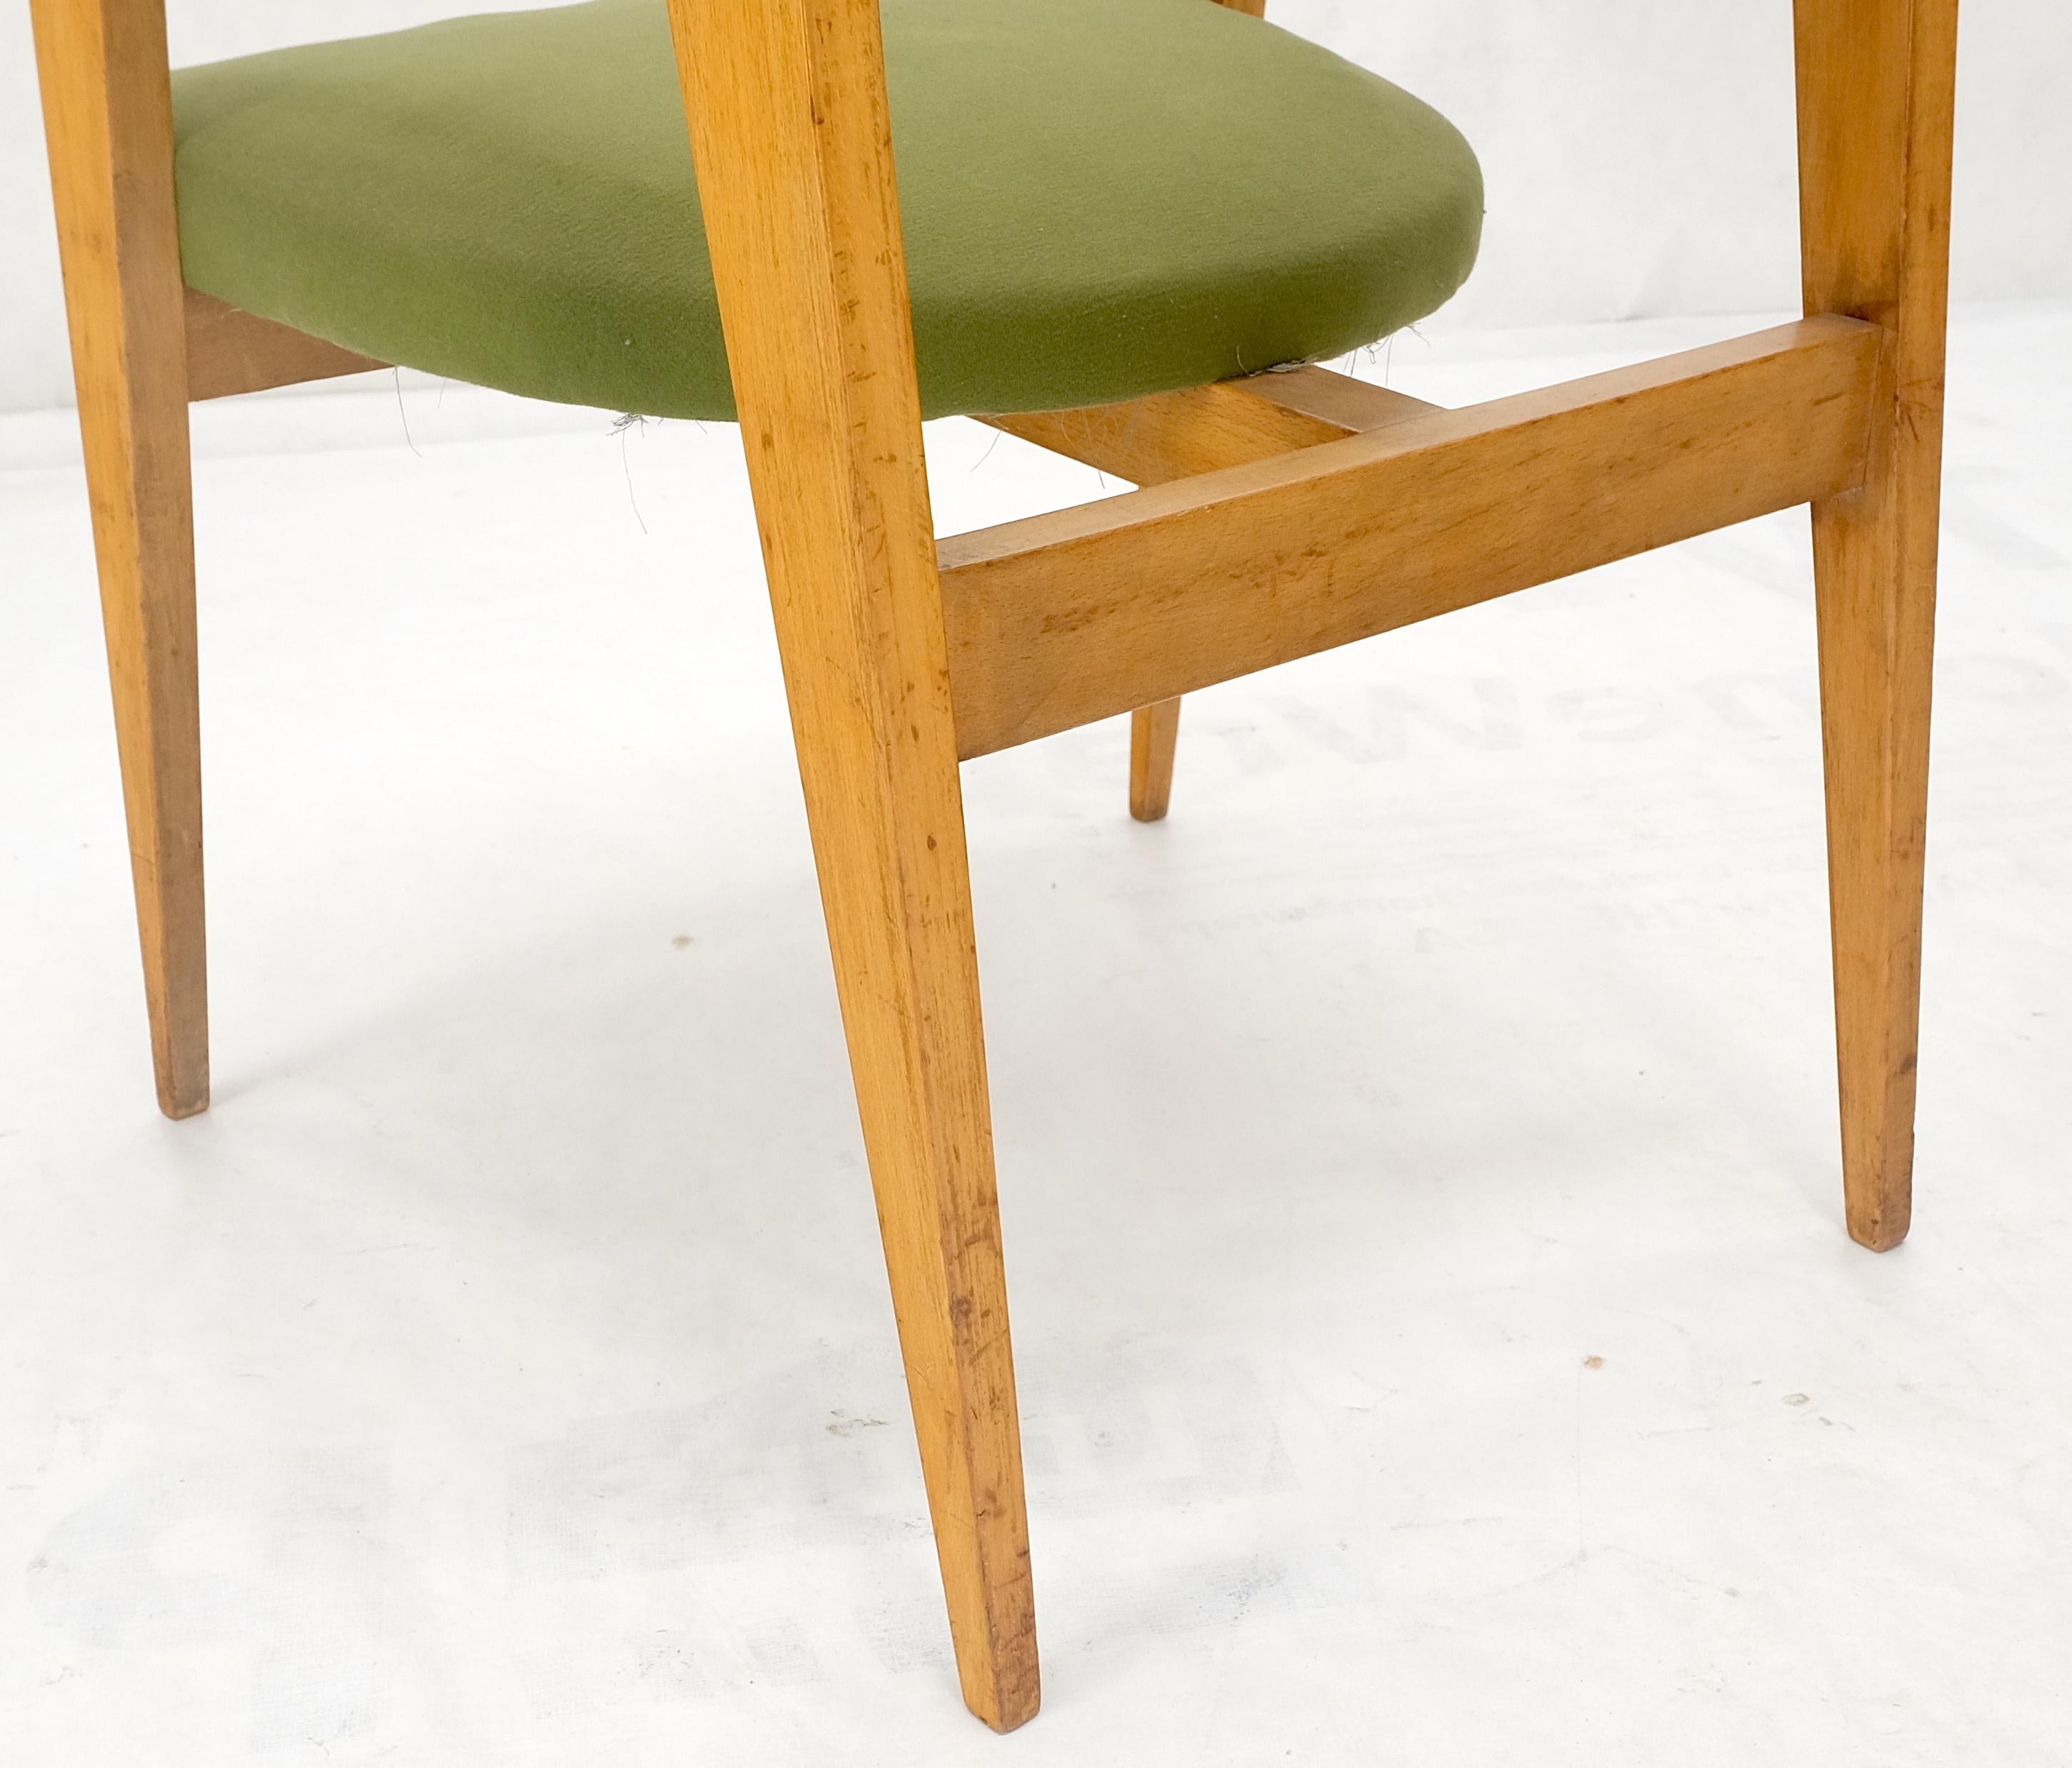 Pair of c1950s Blond Birch Scandinavian Swedish Arm Chairs Green Upholstery For Sale 1